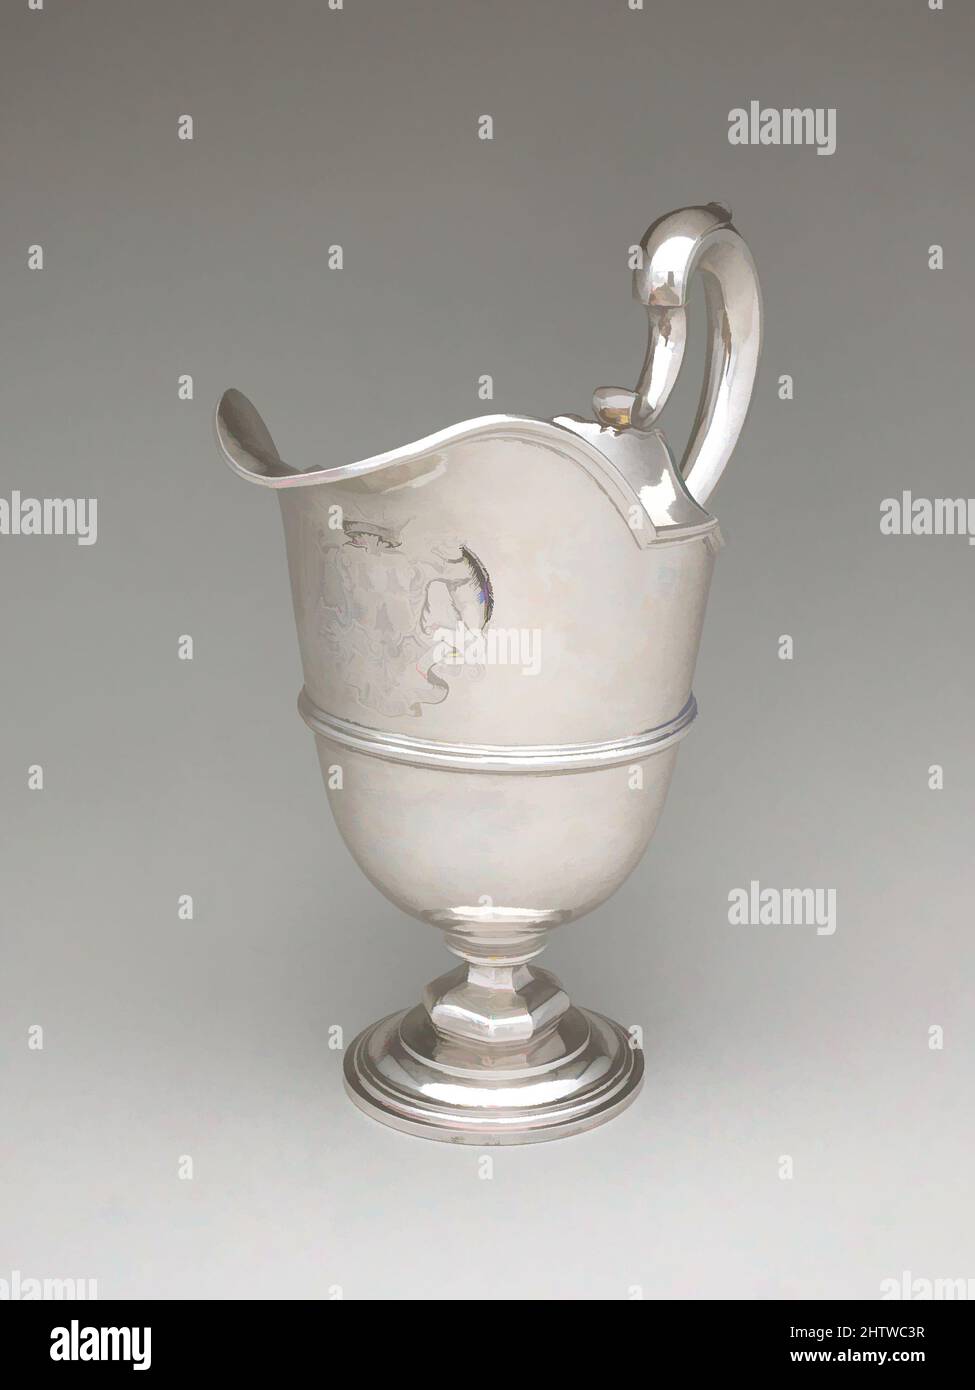 Art inspired by Ewer (one of a pair), 1740/41, British, London, Silver, Overall (wt. confirmed): 10 1/4 in., 58 oz. 3 dwt. (26 cm, 1808.5g), Metalwork-Silver, When George Booth became Earl of Warrington at the age of nineteen, he inherited the estate of Dunham Massey, which was heavily, Classic works modernized by Artotop with a splash of modernity. Shapes, color and value, eye-catching visual impact on art. Emotions through freedom of artworks in a contemporary way. A timeless message pursuing a wildly creative new direction. Artists turning to the digital medium and creating the Artotop NFT Stock Photo